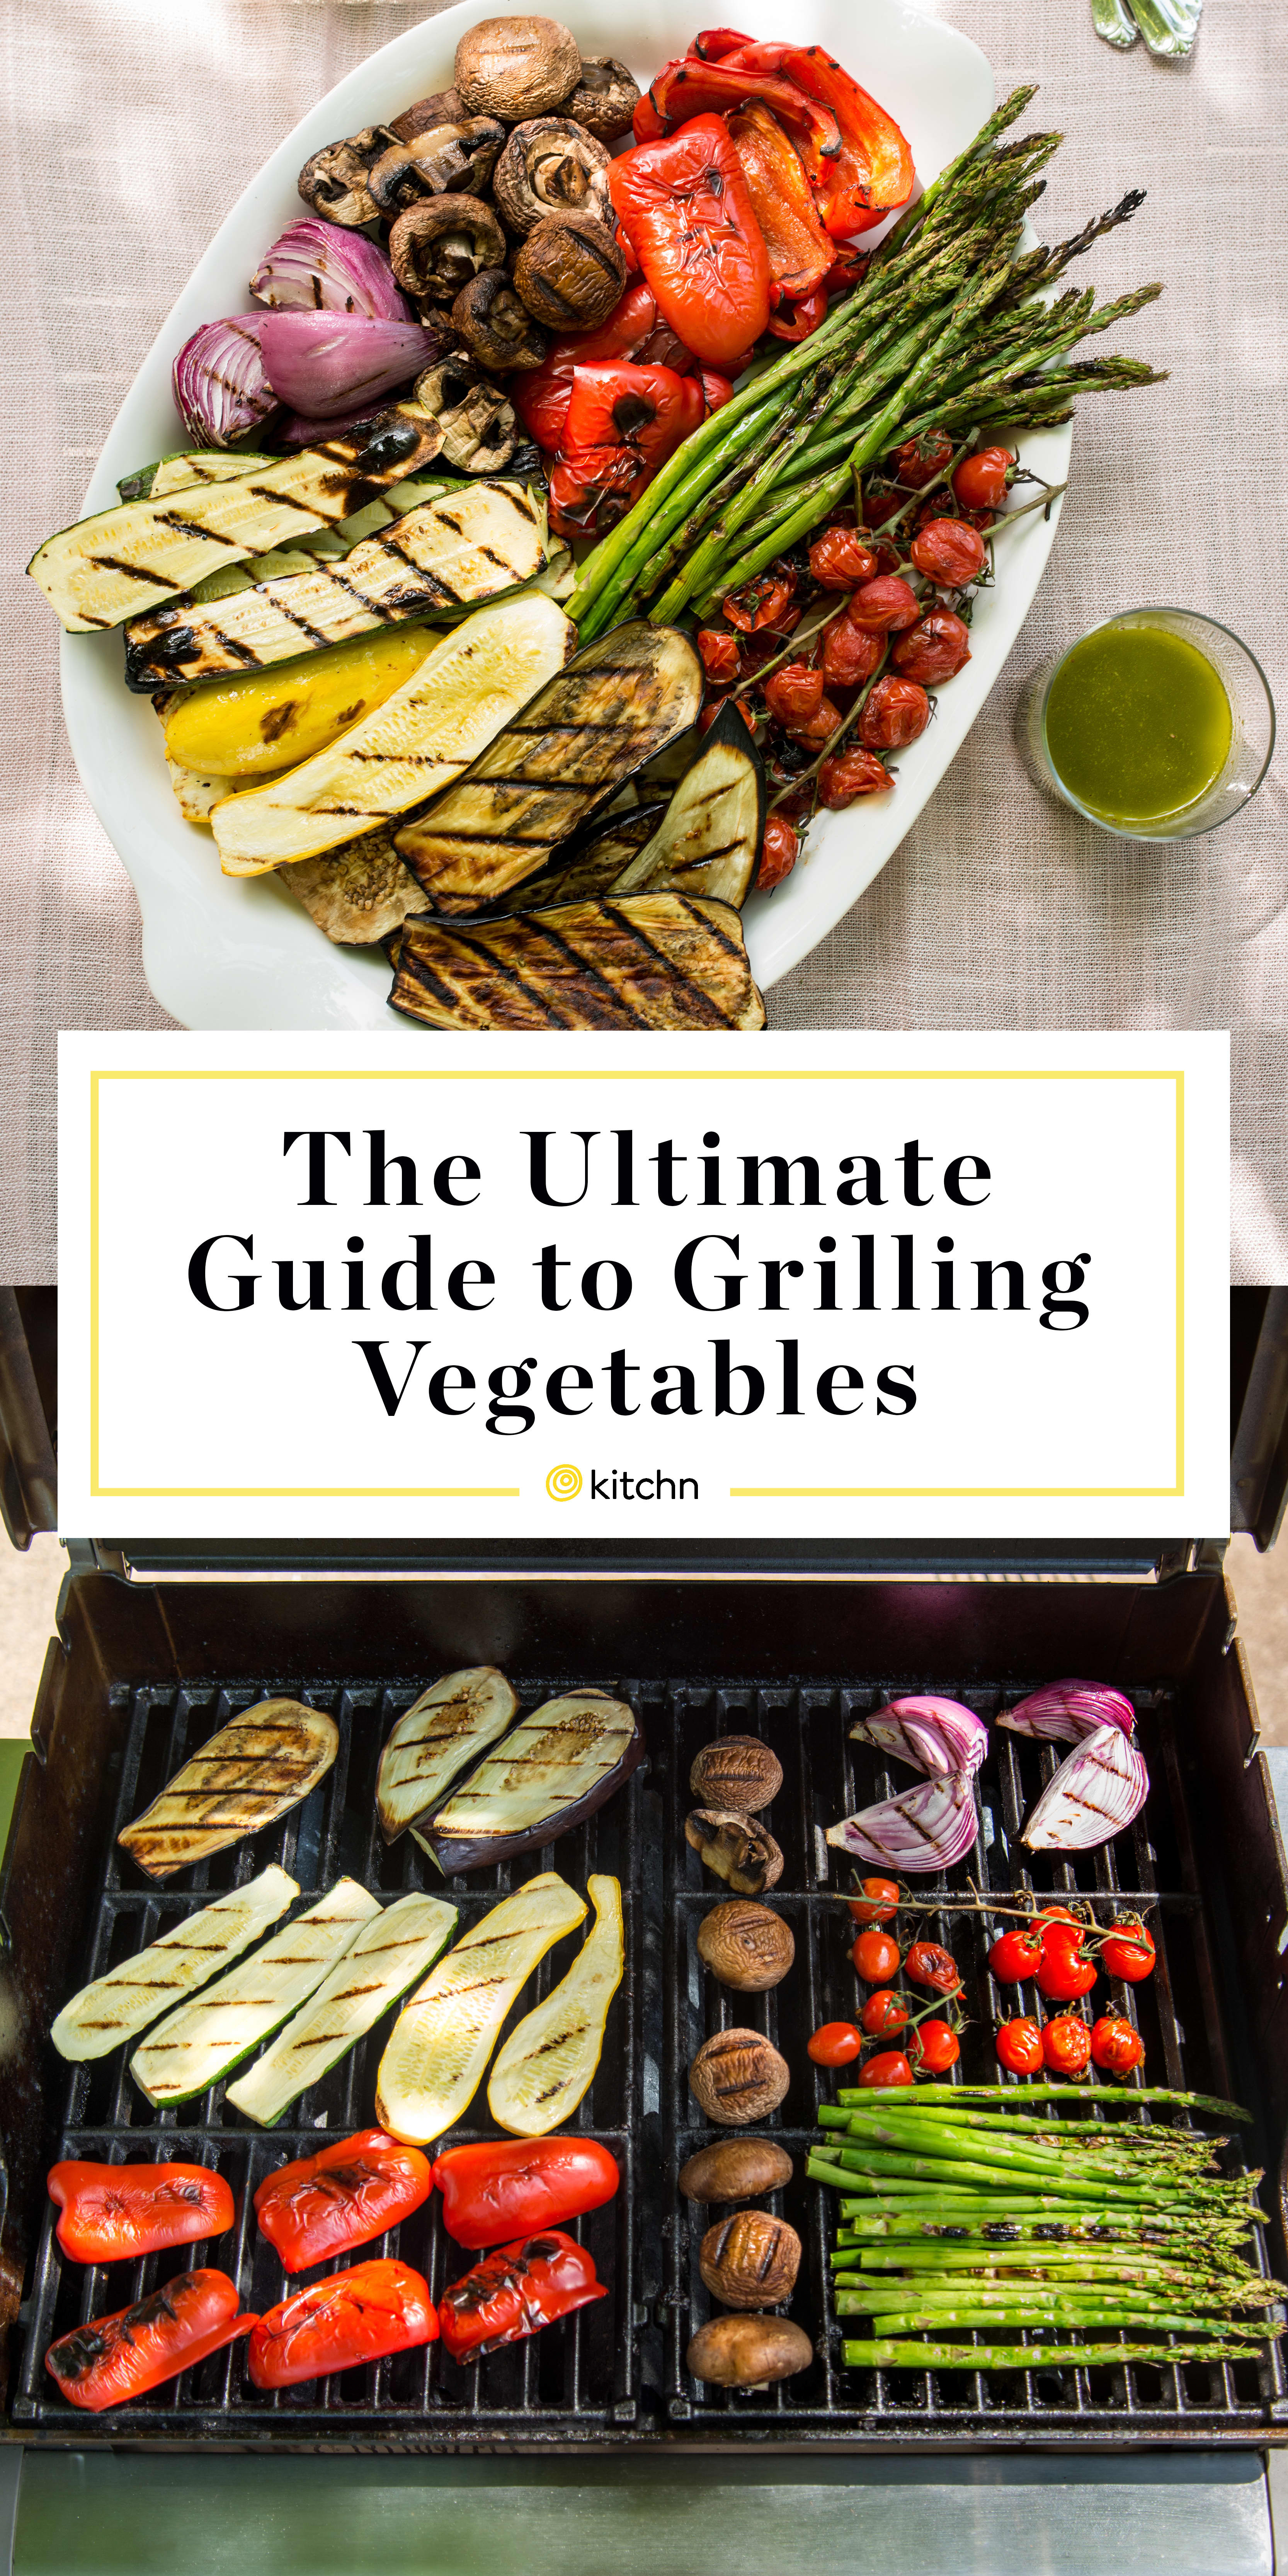 https://cdn.apartmenttherapy.info/image/upload/v1588887247/k/Photo/Recipes/2019-05-how-to-grill-vegetables/theultimateguidetogrillingvegetables.jpg